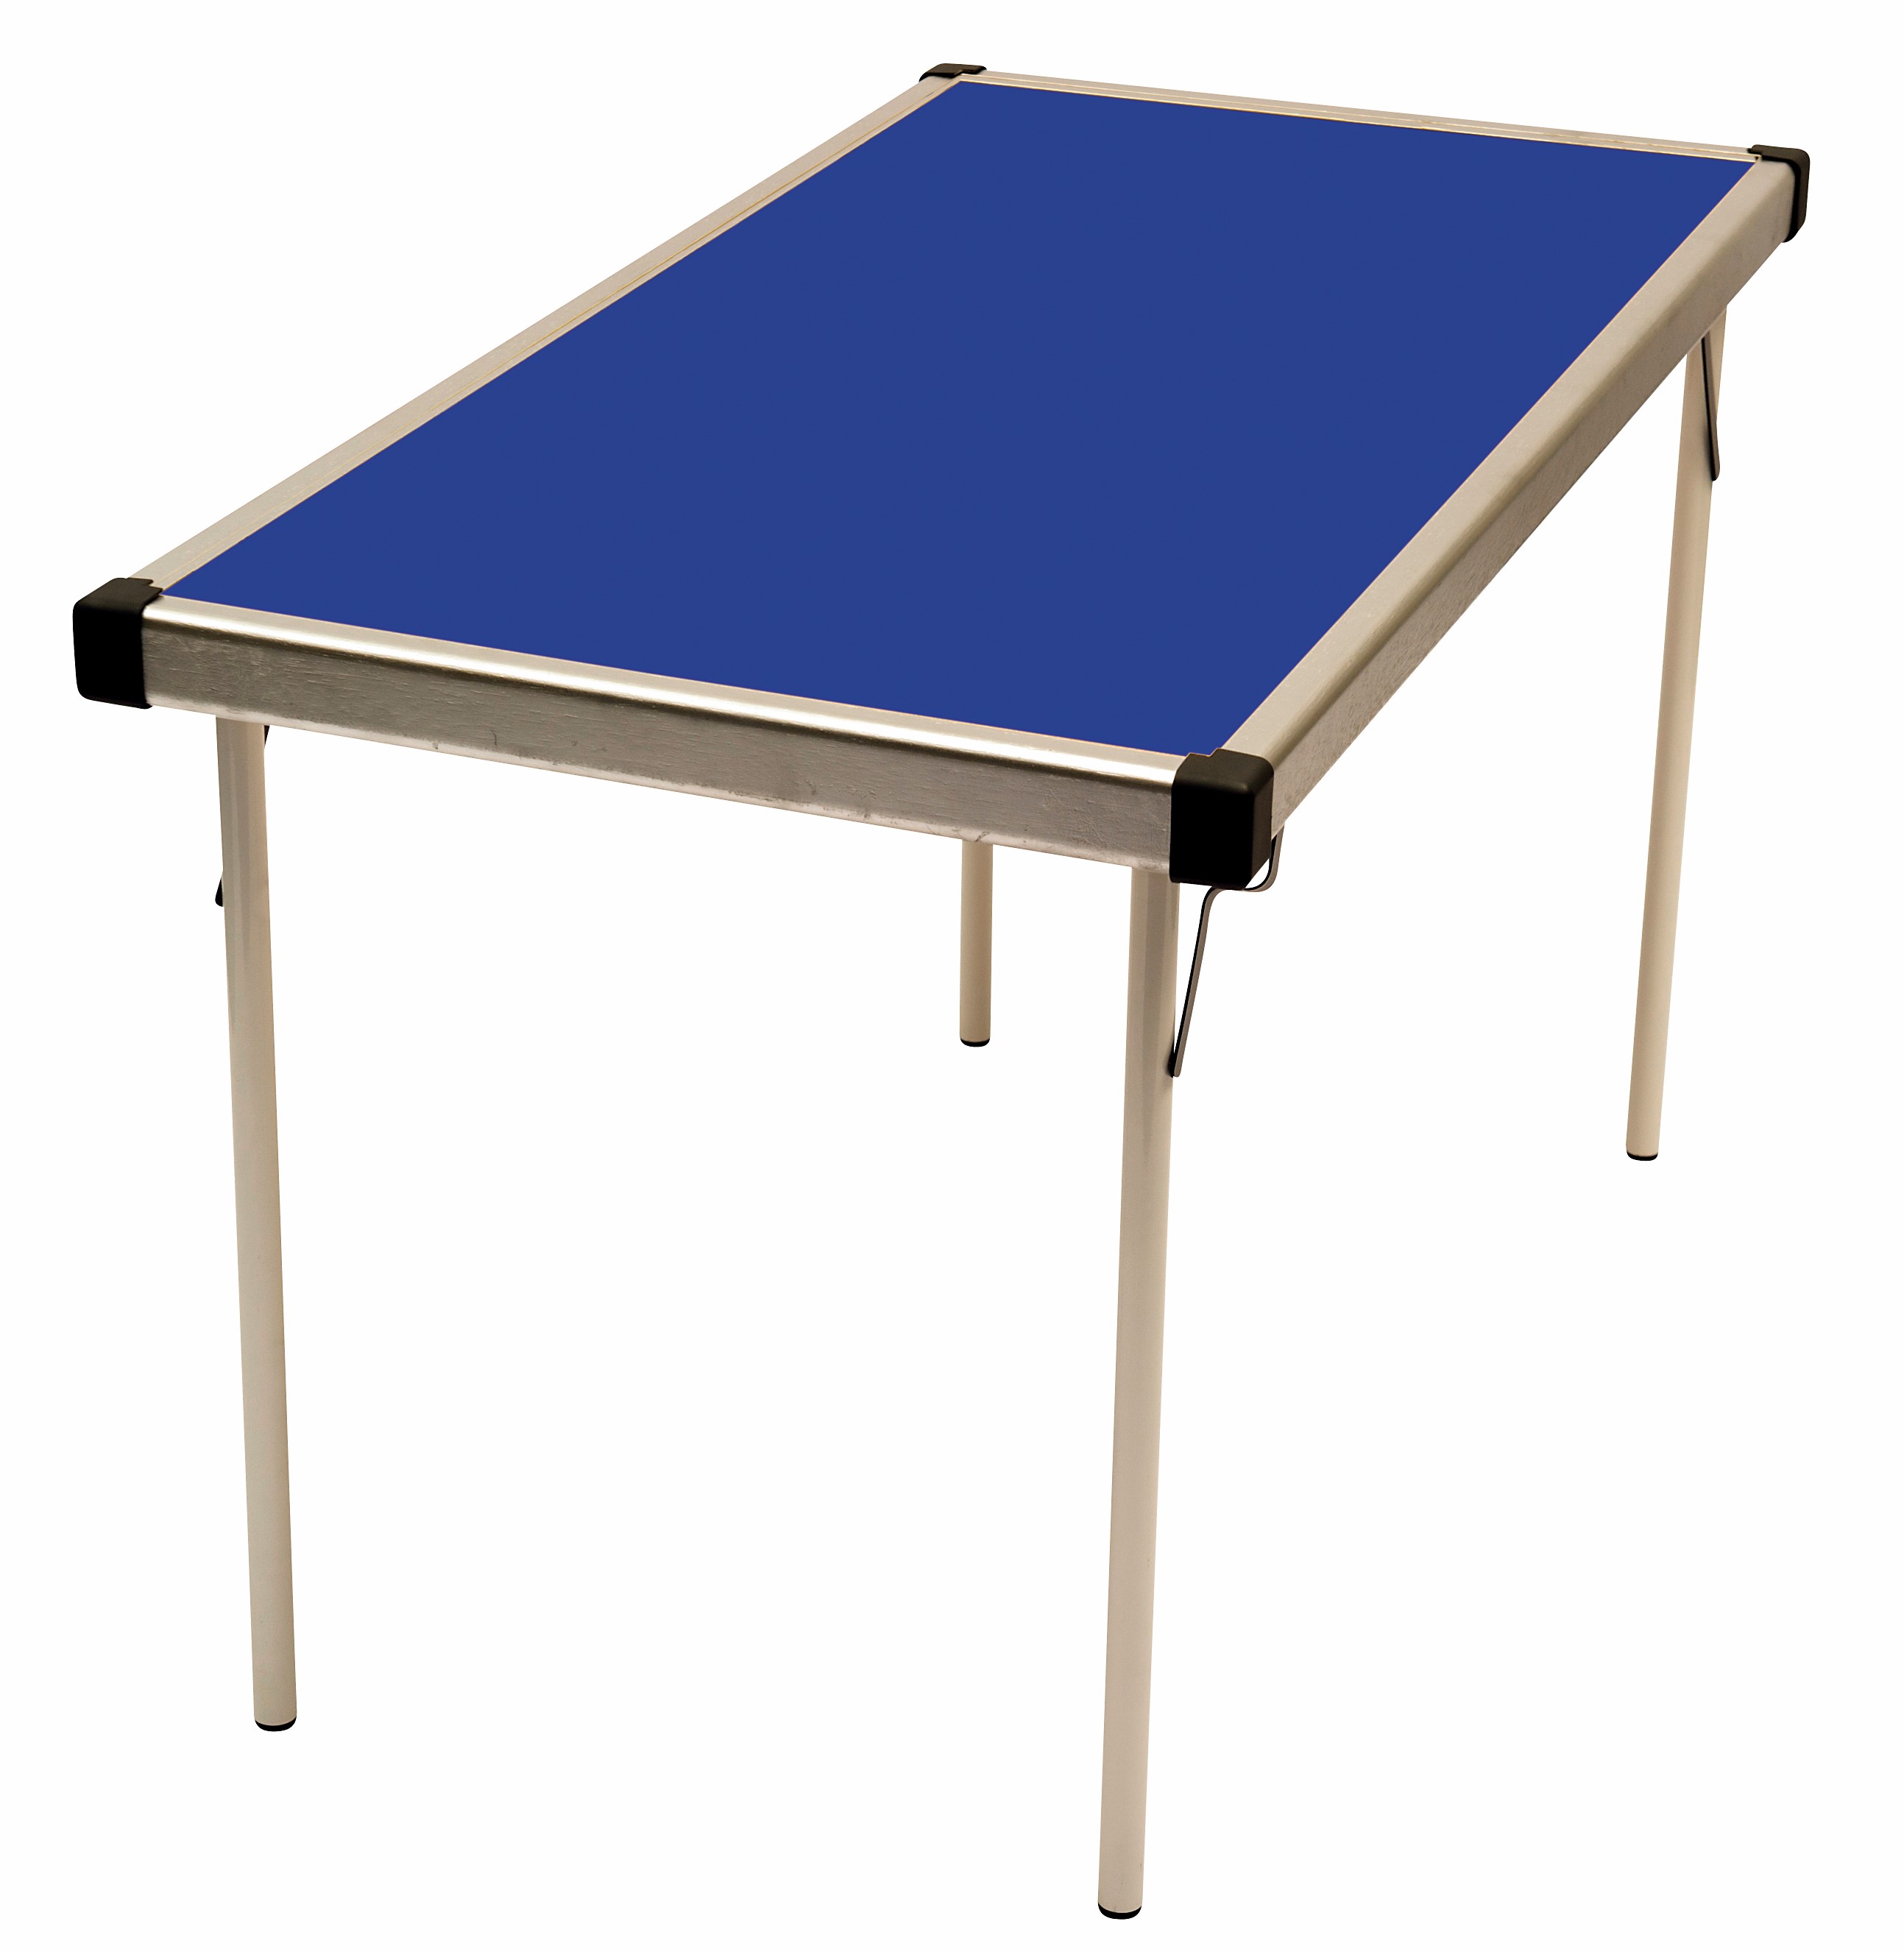 Fast Fold Table 1830 x 685 H710 Blue